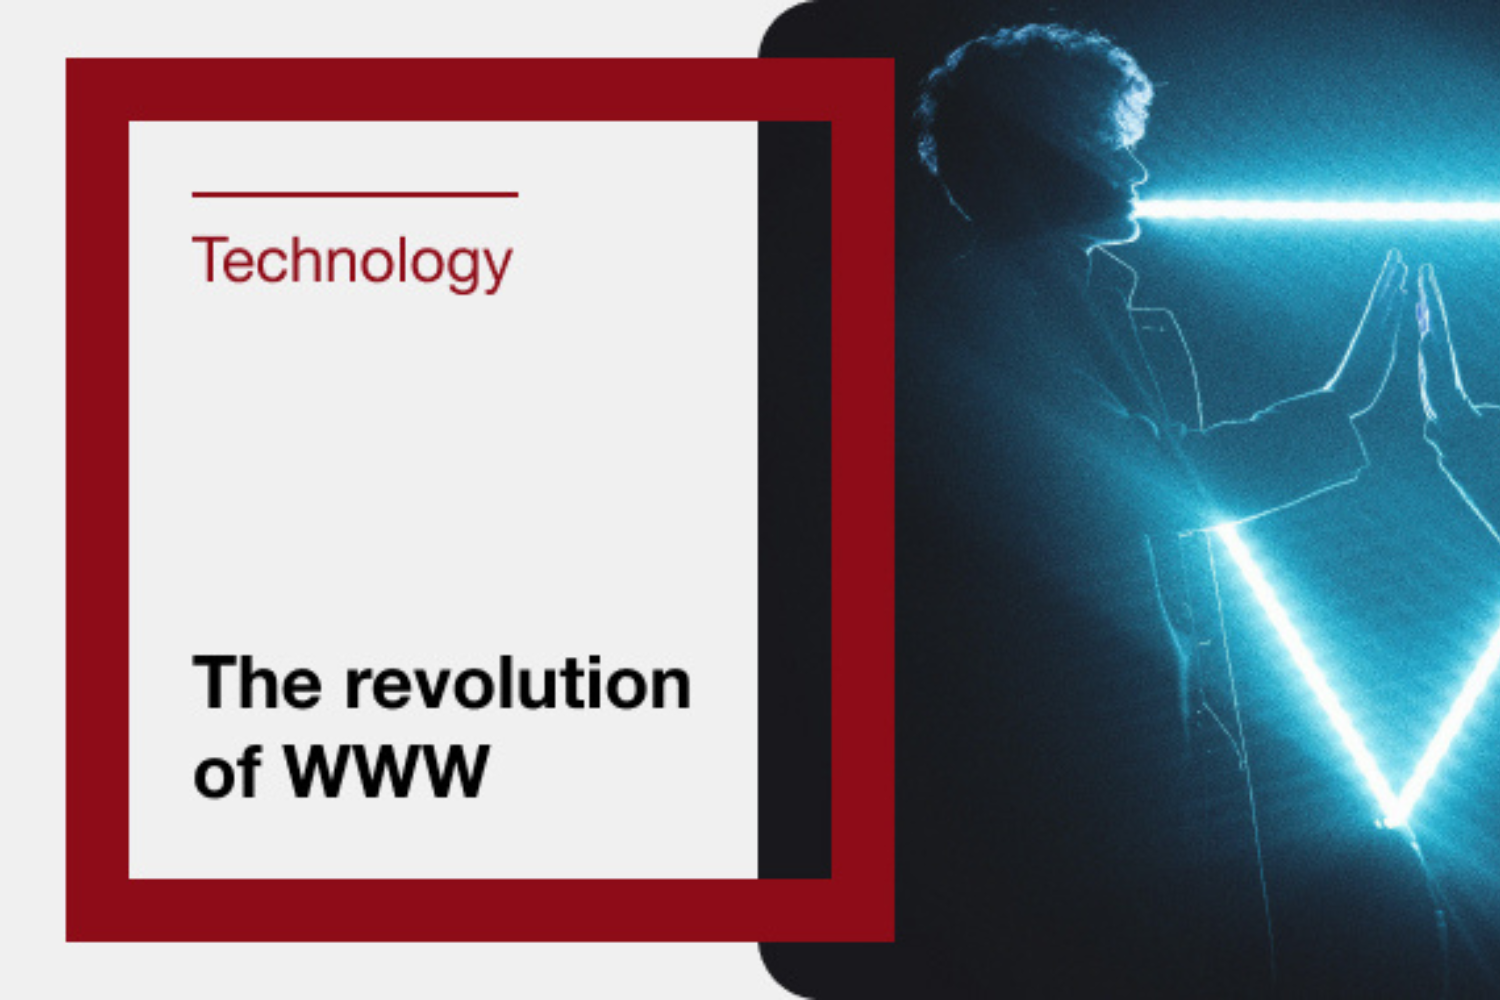 Technology Publication: Revolution of the World Wide Web